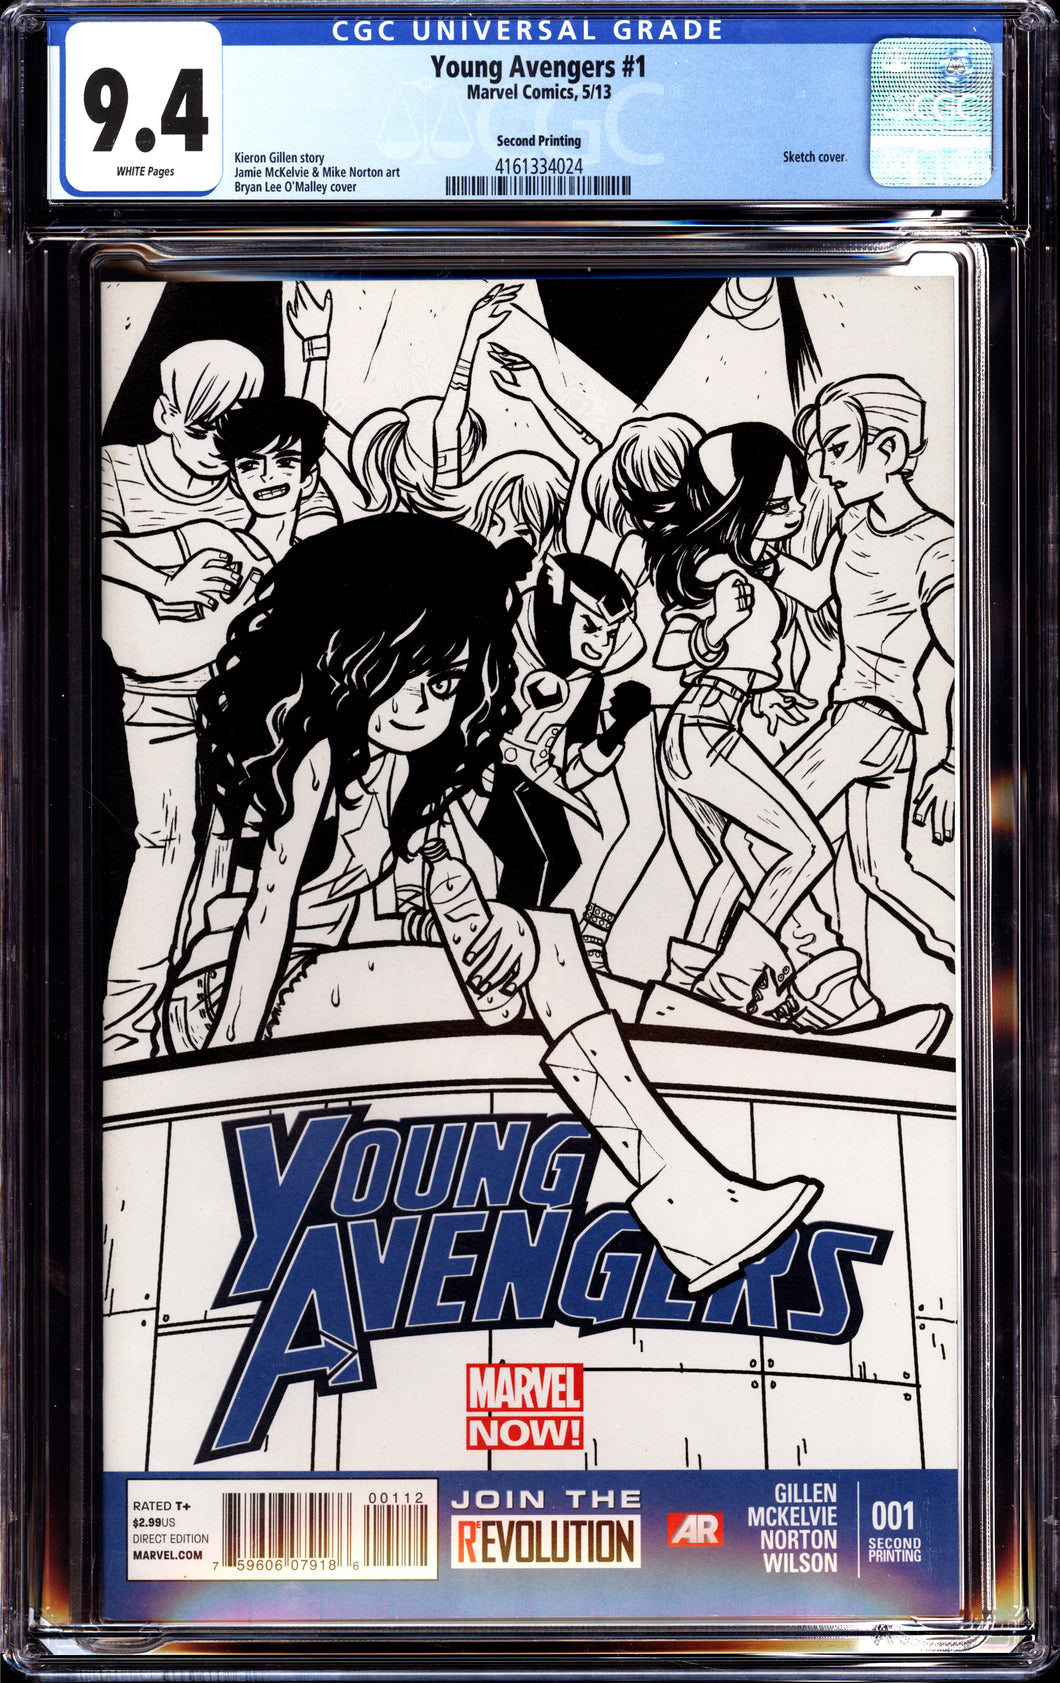 YOUNG AVENGERS #1 (2013) CGC 9.4 NM 2nd Printing O'MALLEY SKETCH VARIANT